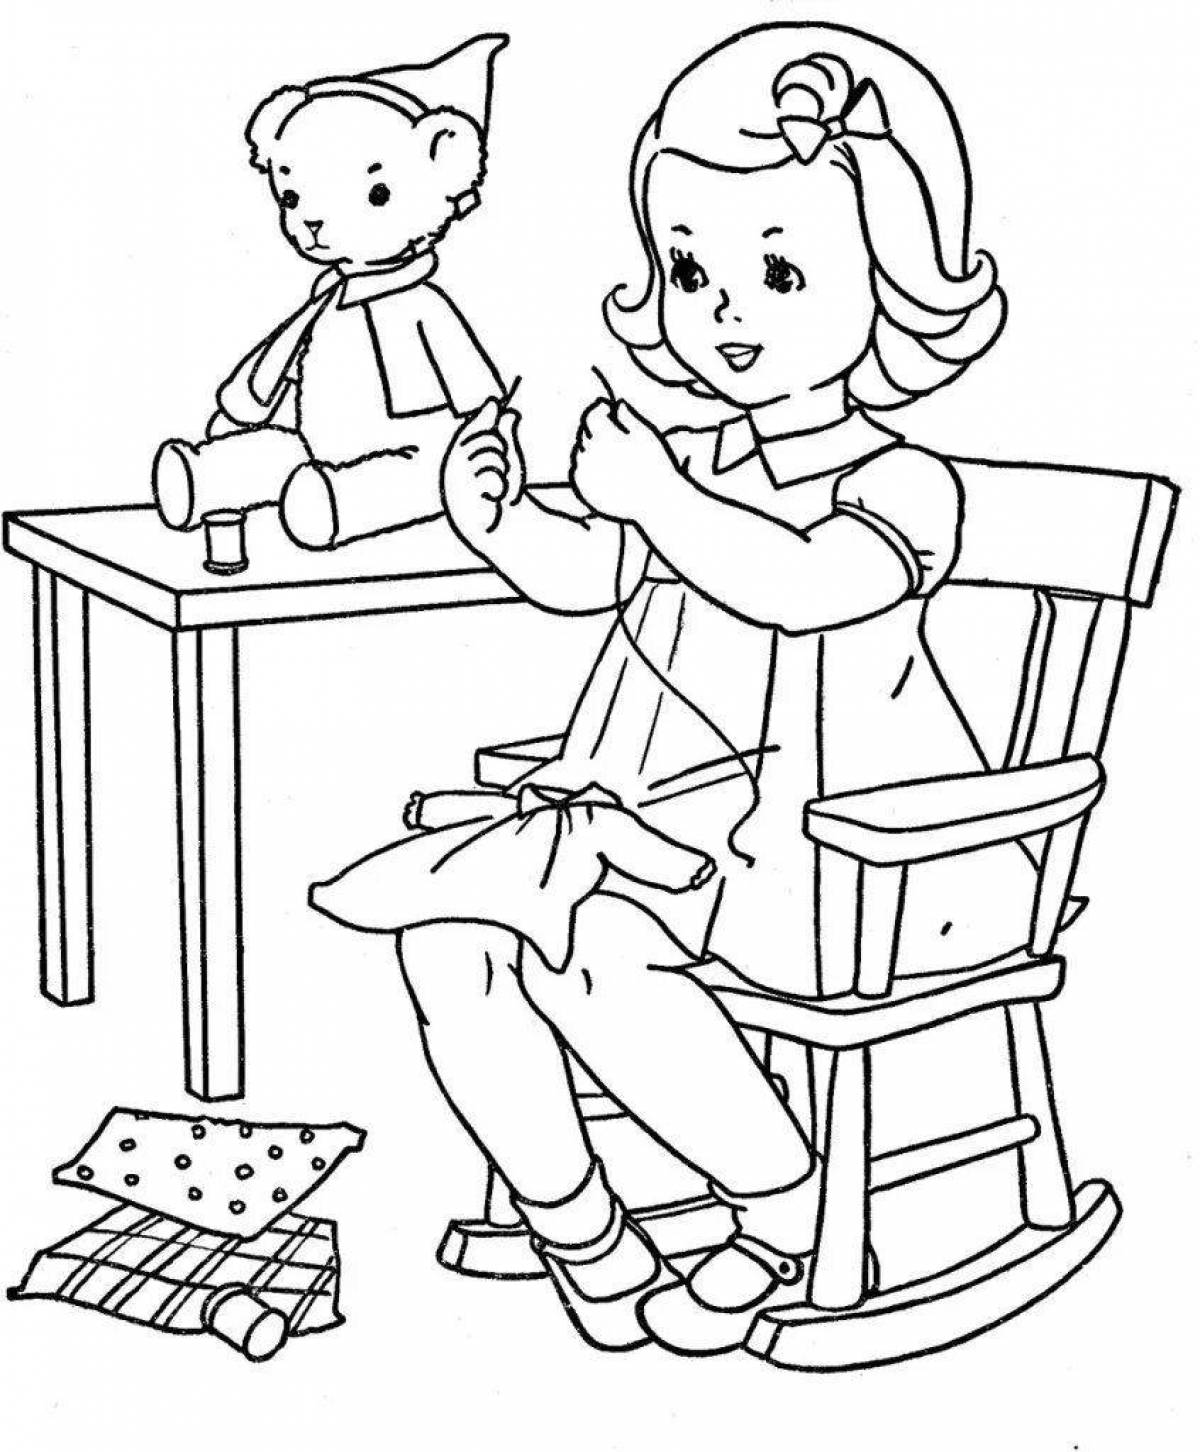 Adorable seamstress coloring book for kids